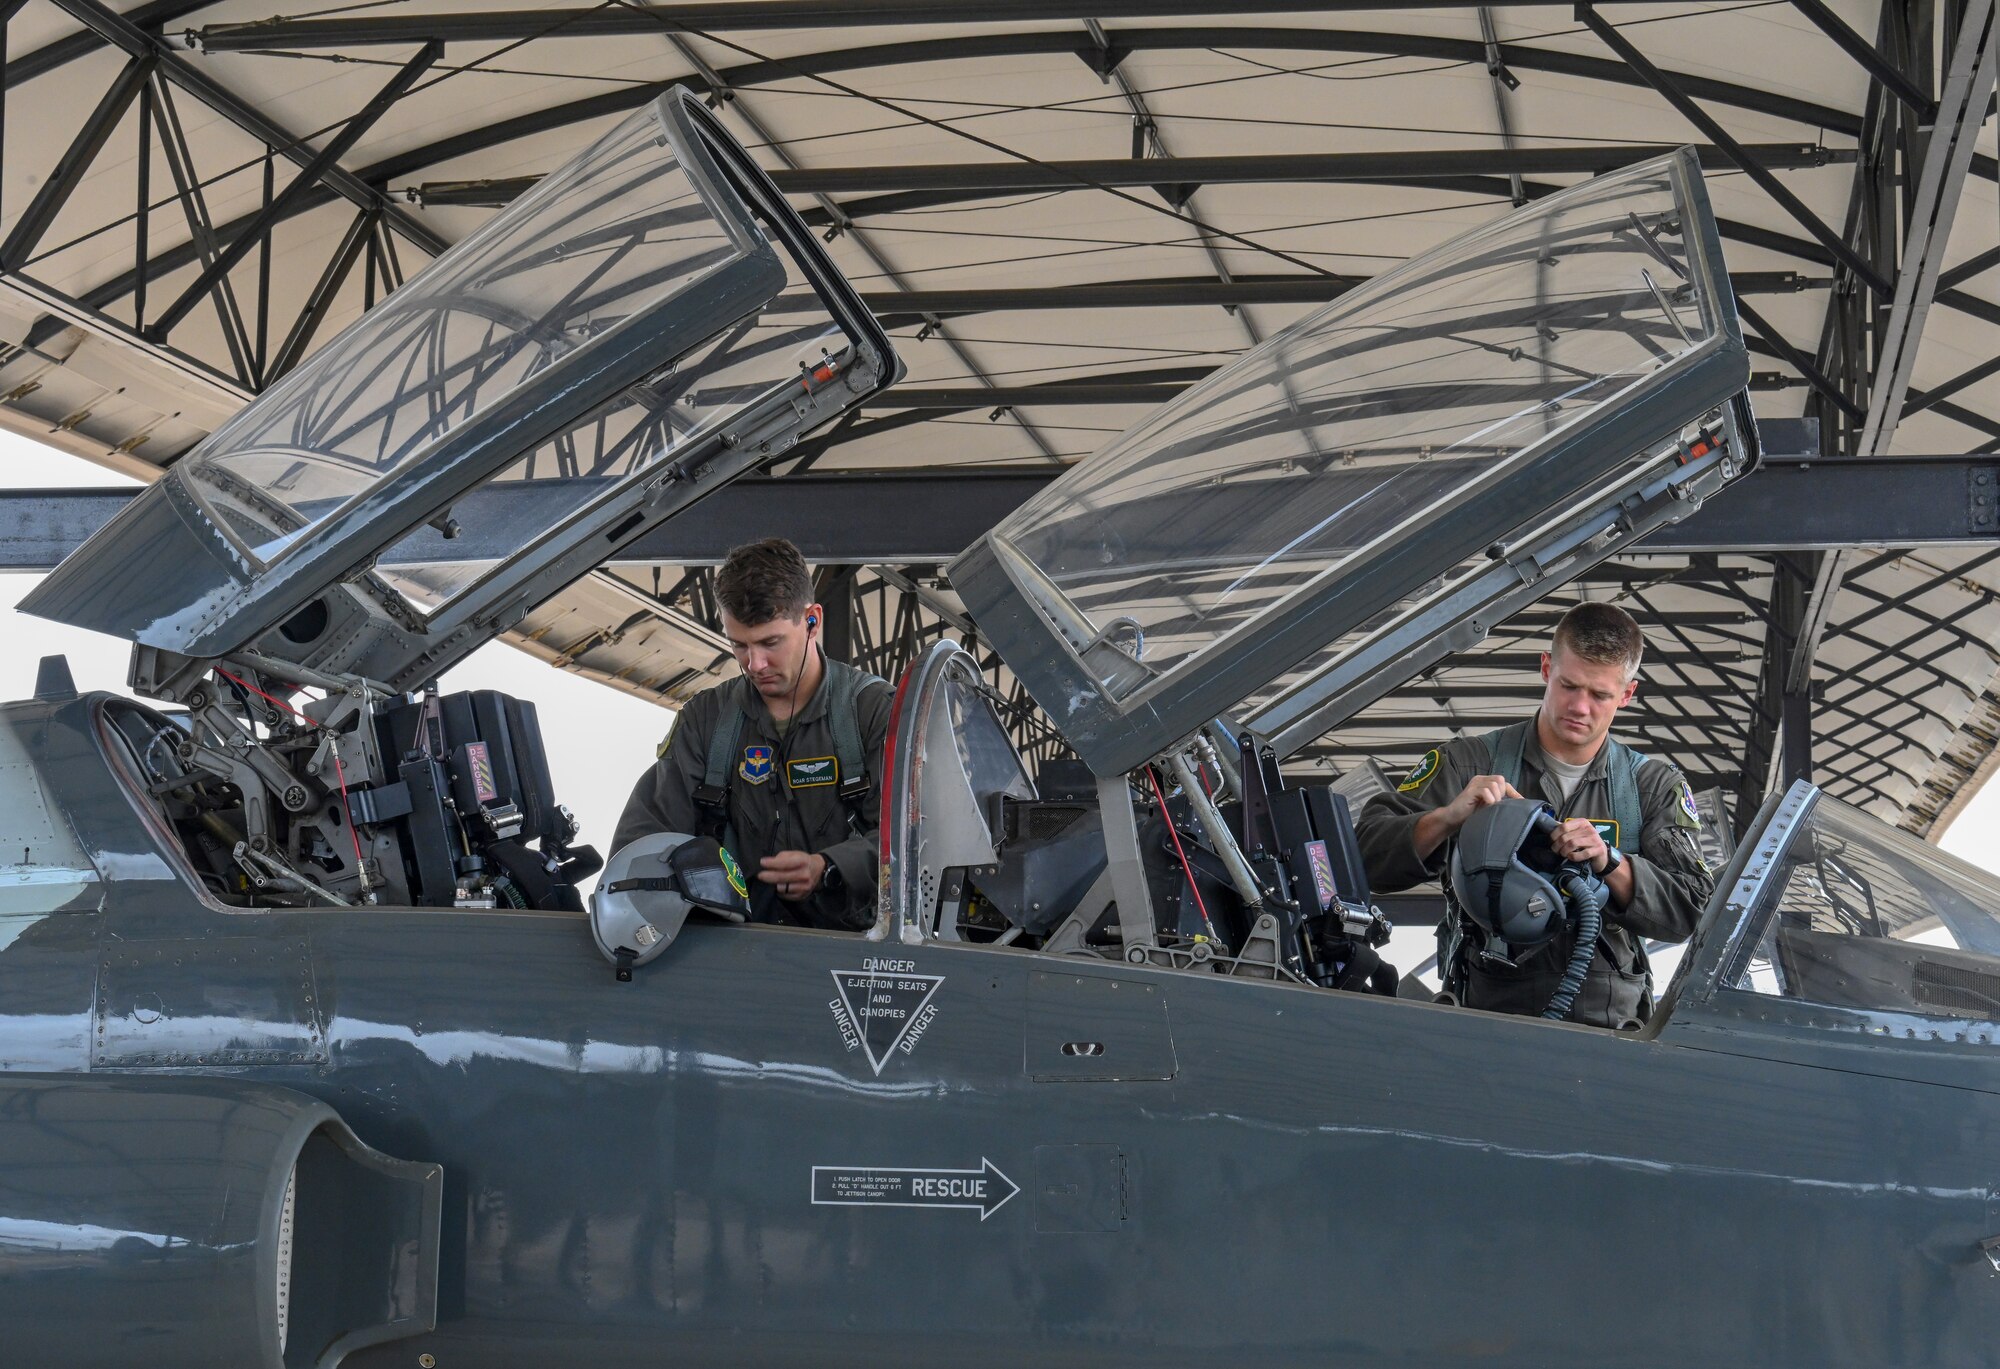 U.S. Air Force Capt. Cole Stegeman (left), 49th Fighter Training Squadron instructor pilot, and 1st Lt. Jared Rackers, 49th FTS Introduction to Fighter Fundamentals graduate, prepare for a flight in a T-38 Talon Nov. 11, 2020, on Columbus Air Force Base, Miss. Stegeman and Rackers both hail from a town called Jefferson City in Missouri and graduated from the same high school. (U.S. Air Force photo by Airman 1st Class Davis Donaldson)